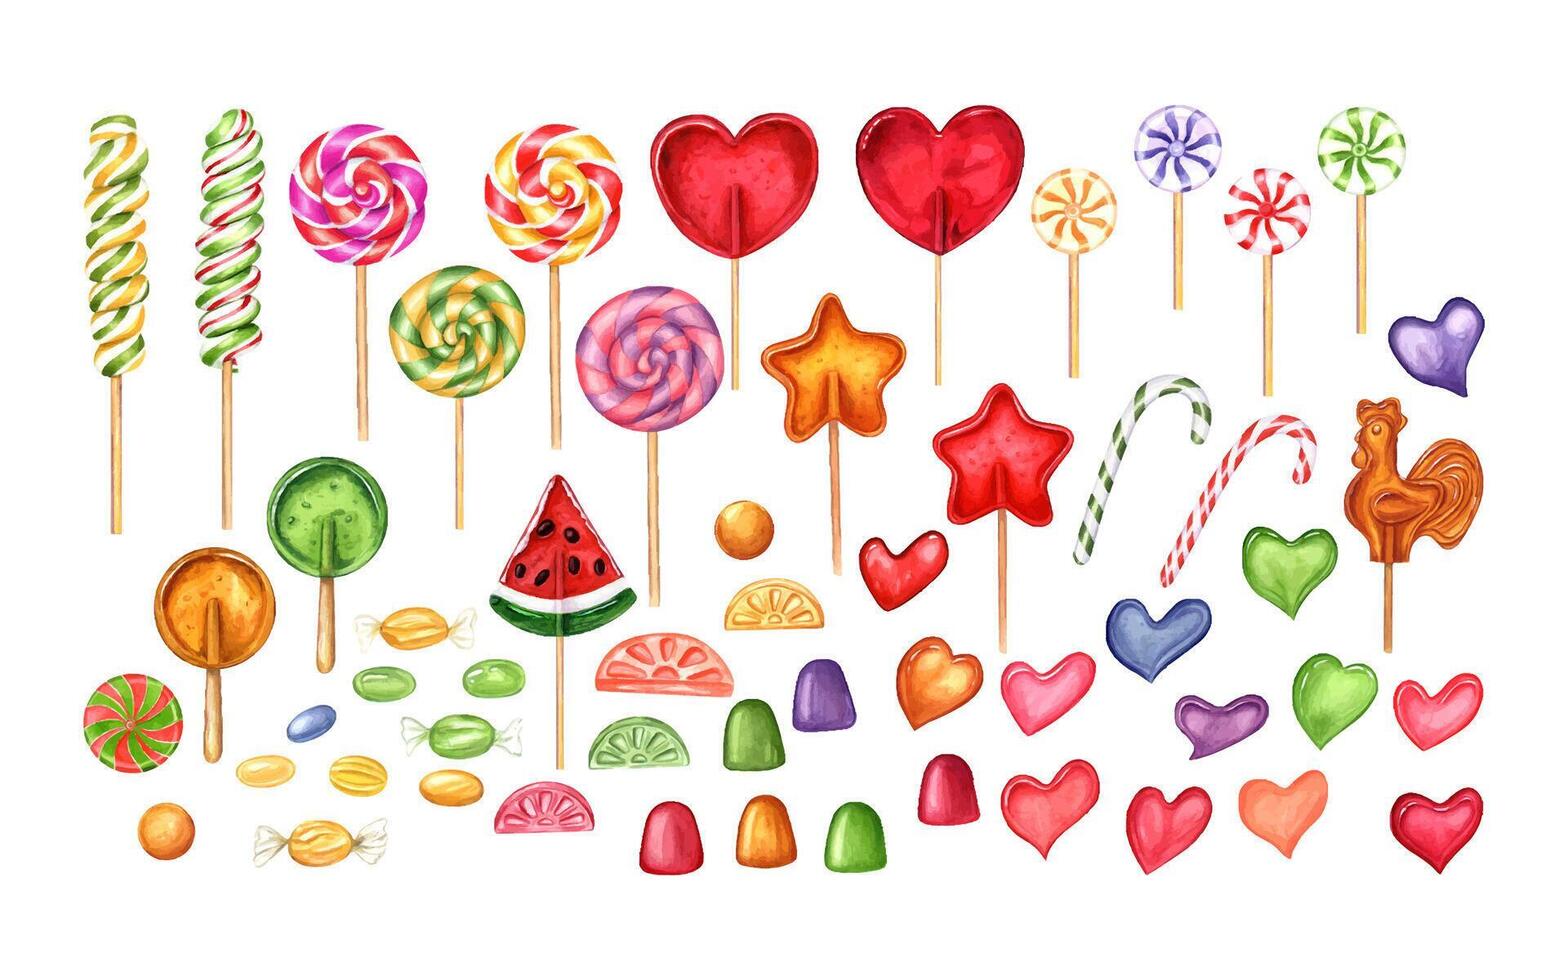 Candies of different colors and shapes. Lollipops in the shape of star and heart. Caramel for Xmas and Halloween. Lollipops cockerel, gummy, spiral candies. Sweet snack. Watercolor illustration vector